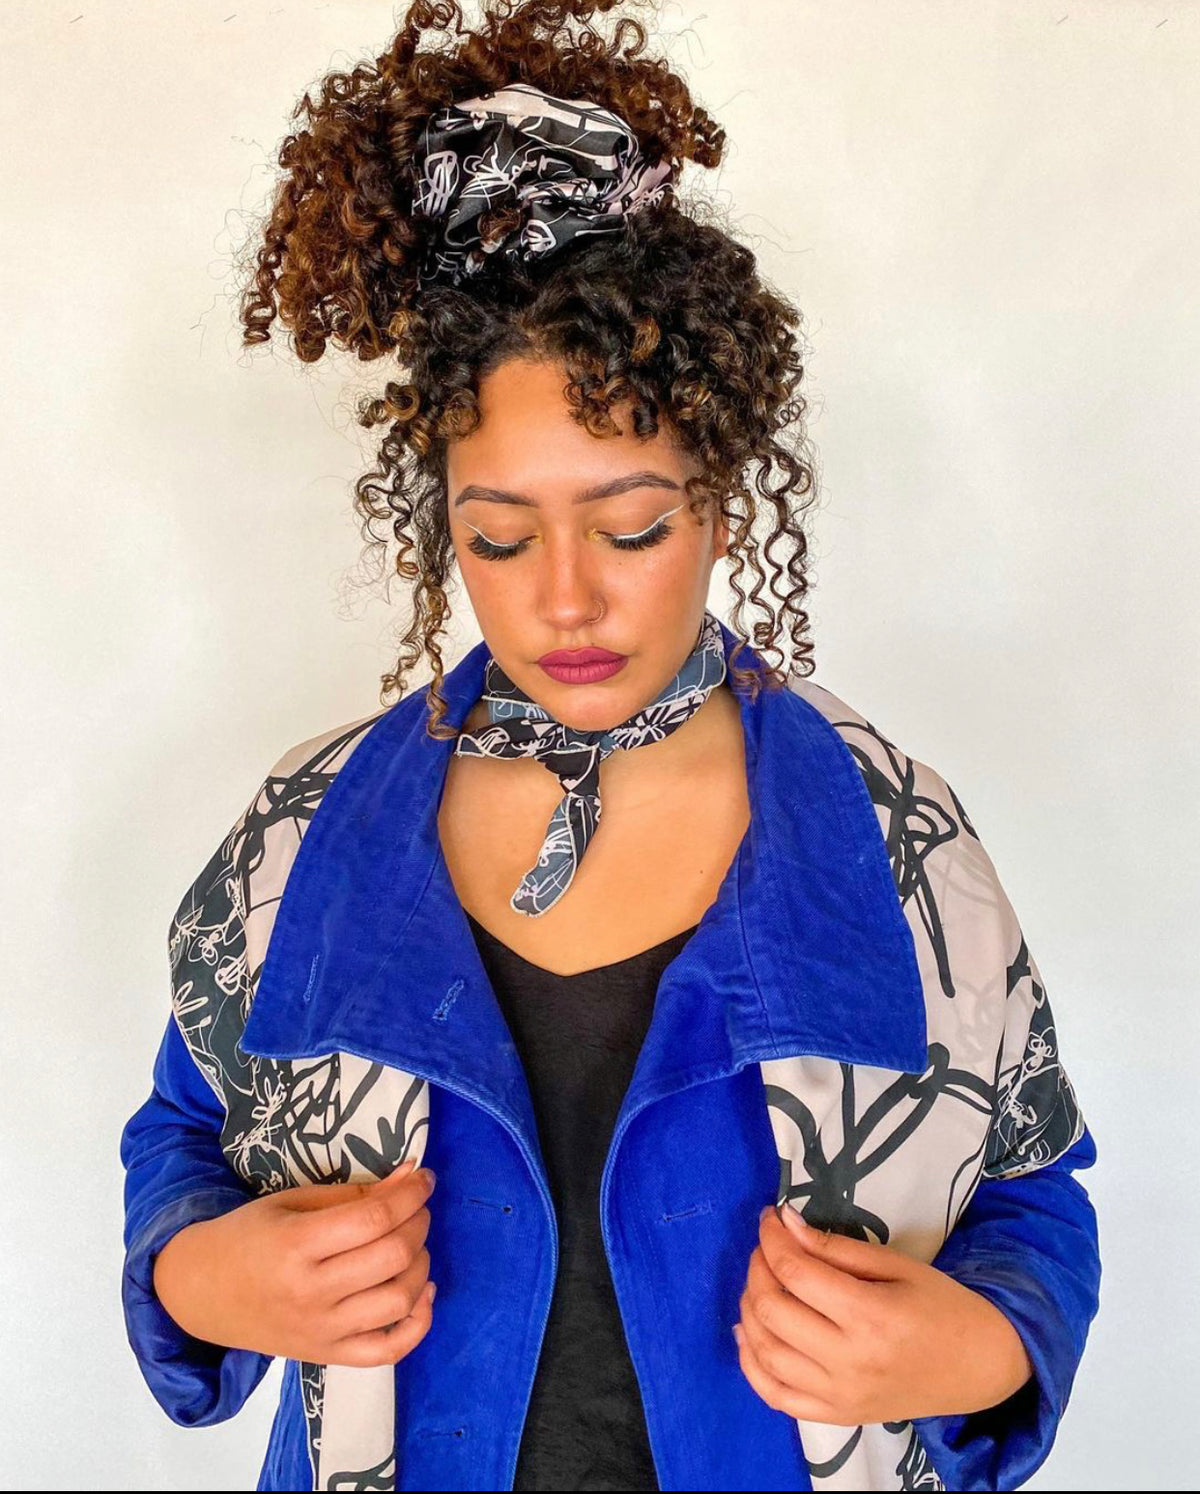 mixed girl wearing luxury fashion items a scarf, giant scrunchie, and bandana. Handmade designs drawn by surface designer